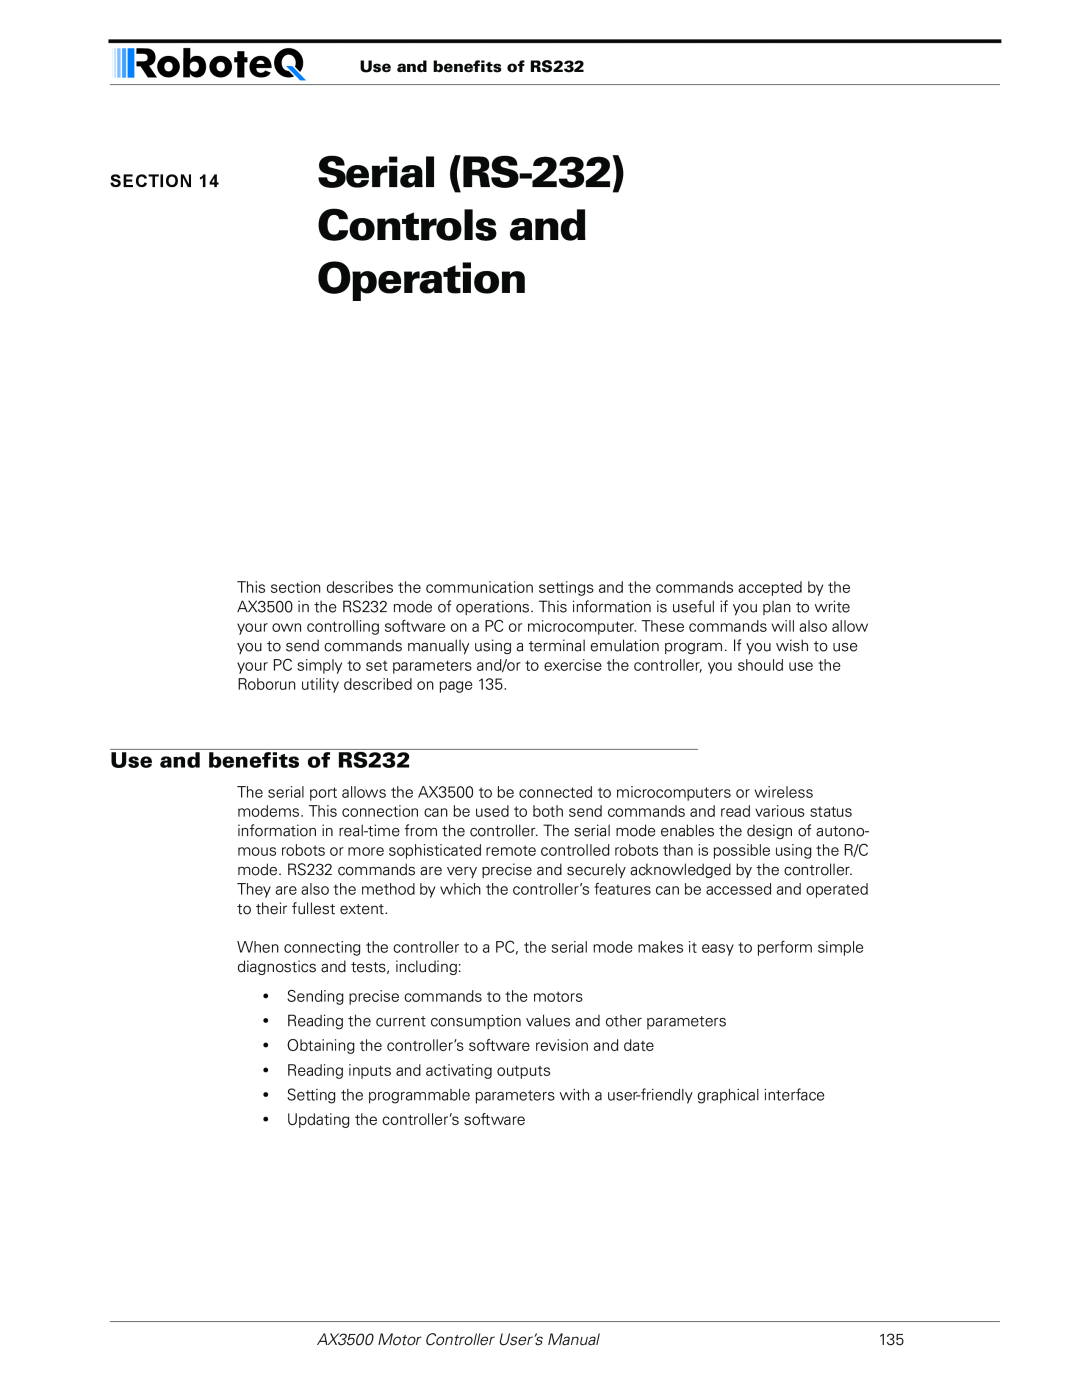 RoboteQ Serial RS-232 Controls and Operation, Use and benefits of RS232, AX3500 Motor Controller User’s Manual 